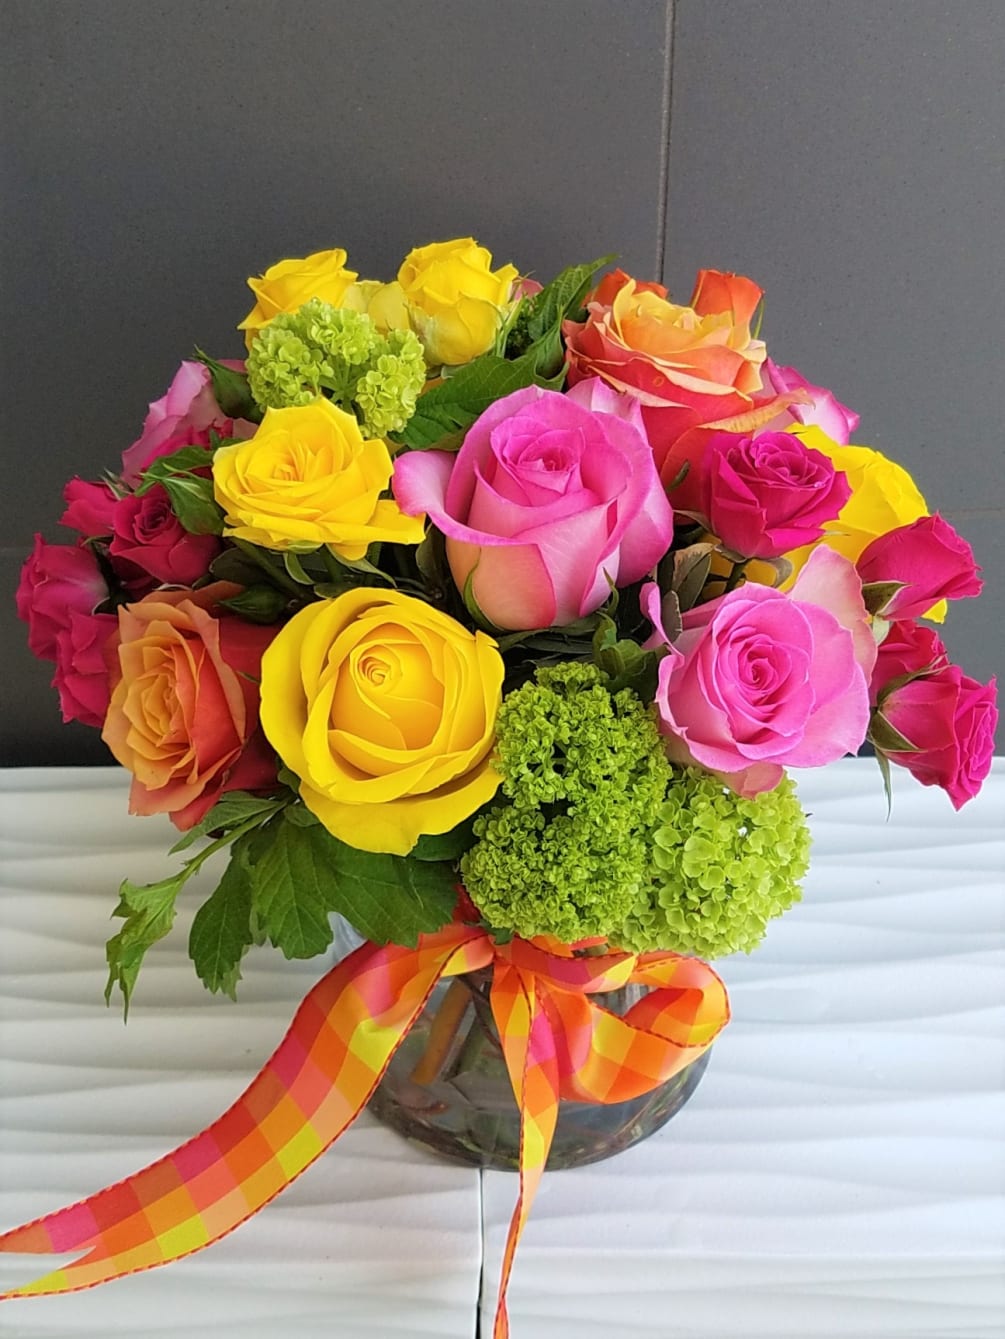 This arrangement was designed in a compact style with a mix of